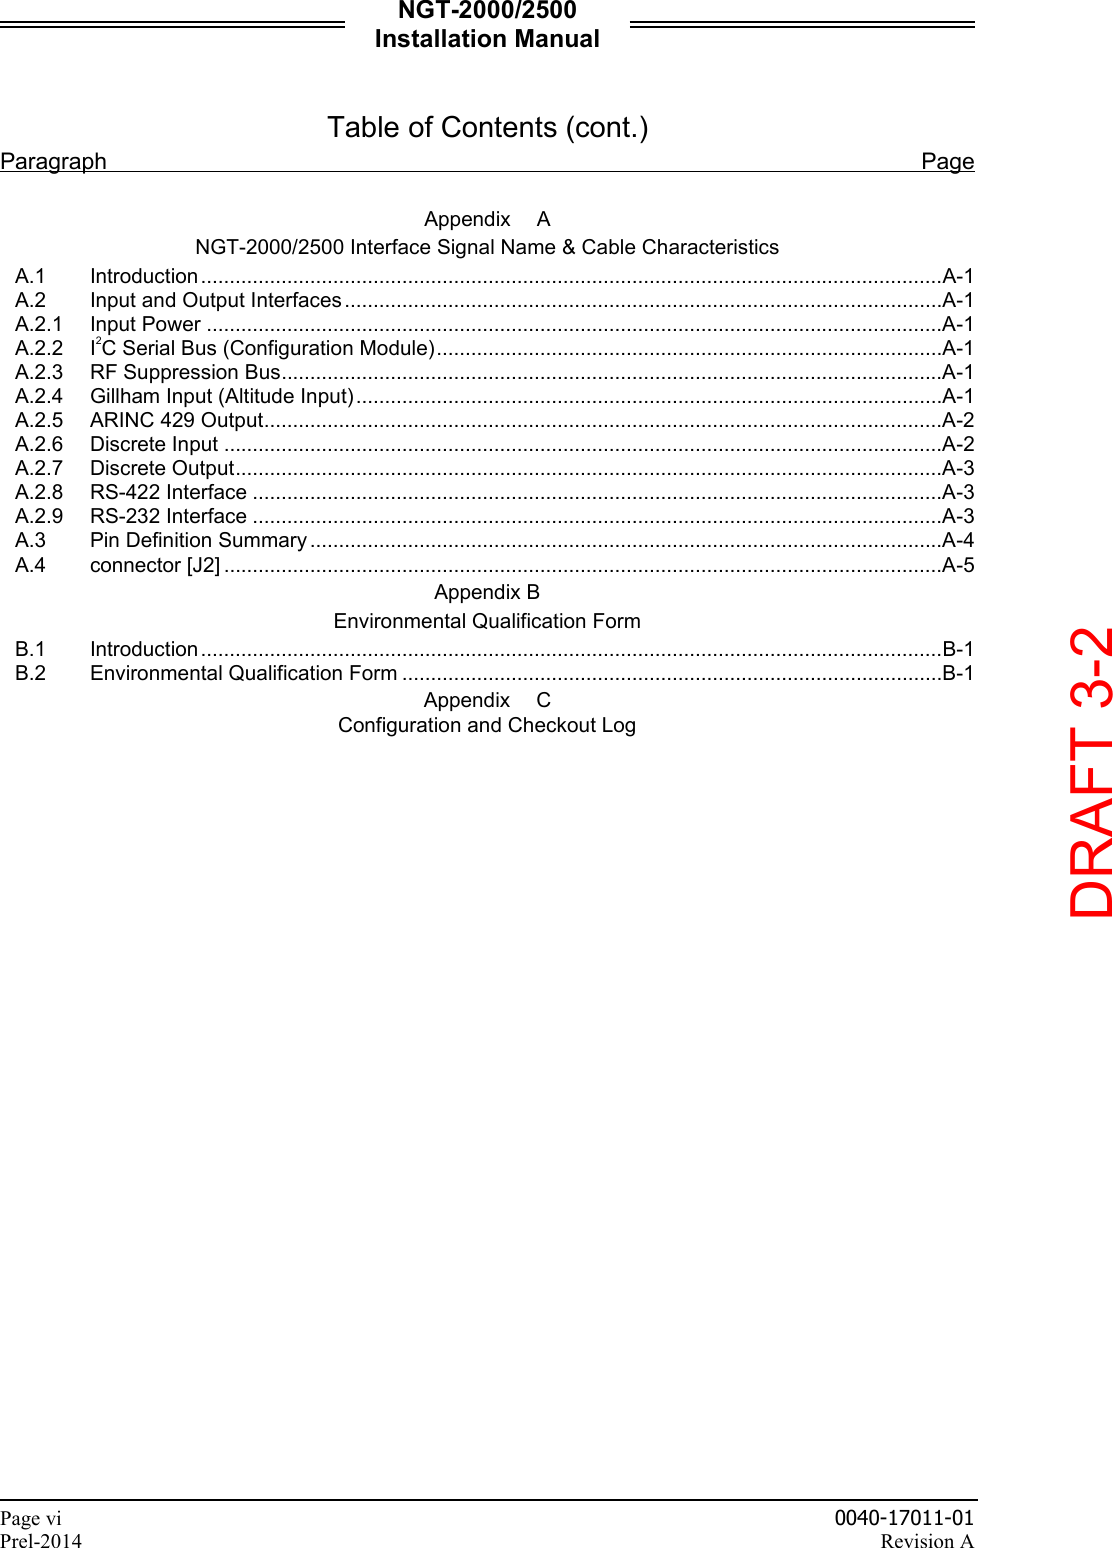 NGT-2000/2500 Installation Manual  Page vi    0040-17011-01 Prel-2014    Revision A  Table of Contents (cont.) Paragraph Page  Appendix  A NGT-2000/2500 Interface Signal Name &amp; Cable Characteristics A.1 Introduction .................................................................................................................................A-1 A.2 Input and Output Interfaces ........................................................................................................A-1 A.2.1 Input Power ................................................................................................................................A-1 A.2.2 I2C Serial Bus (Configuration Module) ........................................................................................A-1 A.2.3 RF Suppression Bus ...................................................................................................................A-1 A.2.4 Gillham Input (Altitude Input) ......................................................................................................A-1 A.2.5 ARINC 429 Output ......................................................................................................................A-2 A.2.6 Discrete Input .............................................................................................................................A-2 A.2.7 Discrete Output ...........................................................................................................................A-3 A.2.8 RS-422 Interface ........................................................................................................................A-3 A.2.9 RS-232 Interface ........................................................................................................................A-3 A.3 Pin Definition Summary ..............................................................................................................A-4 A.4 connector [J2] .............................................................................................................................A-5 Appendix B Environmental Qualification Form B.1 Introduction .................................................................................................................................B-1 B.2 Environmental Qualification Form ..............................................................................................B-1 Appendix  C Configuration and Checkout Log     DRAFT 3-2